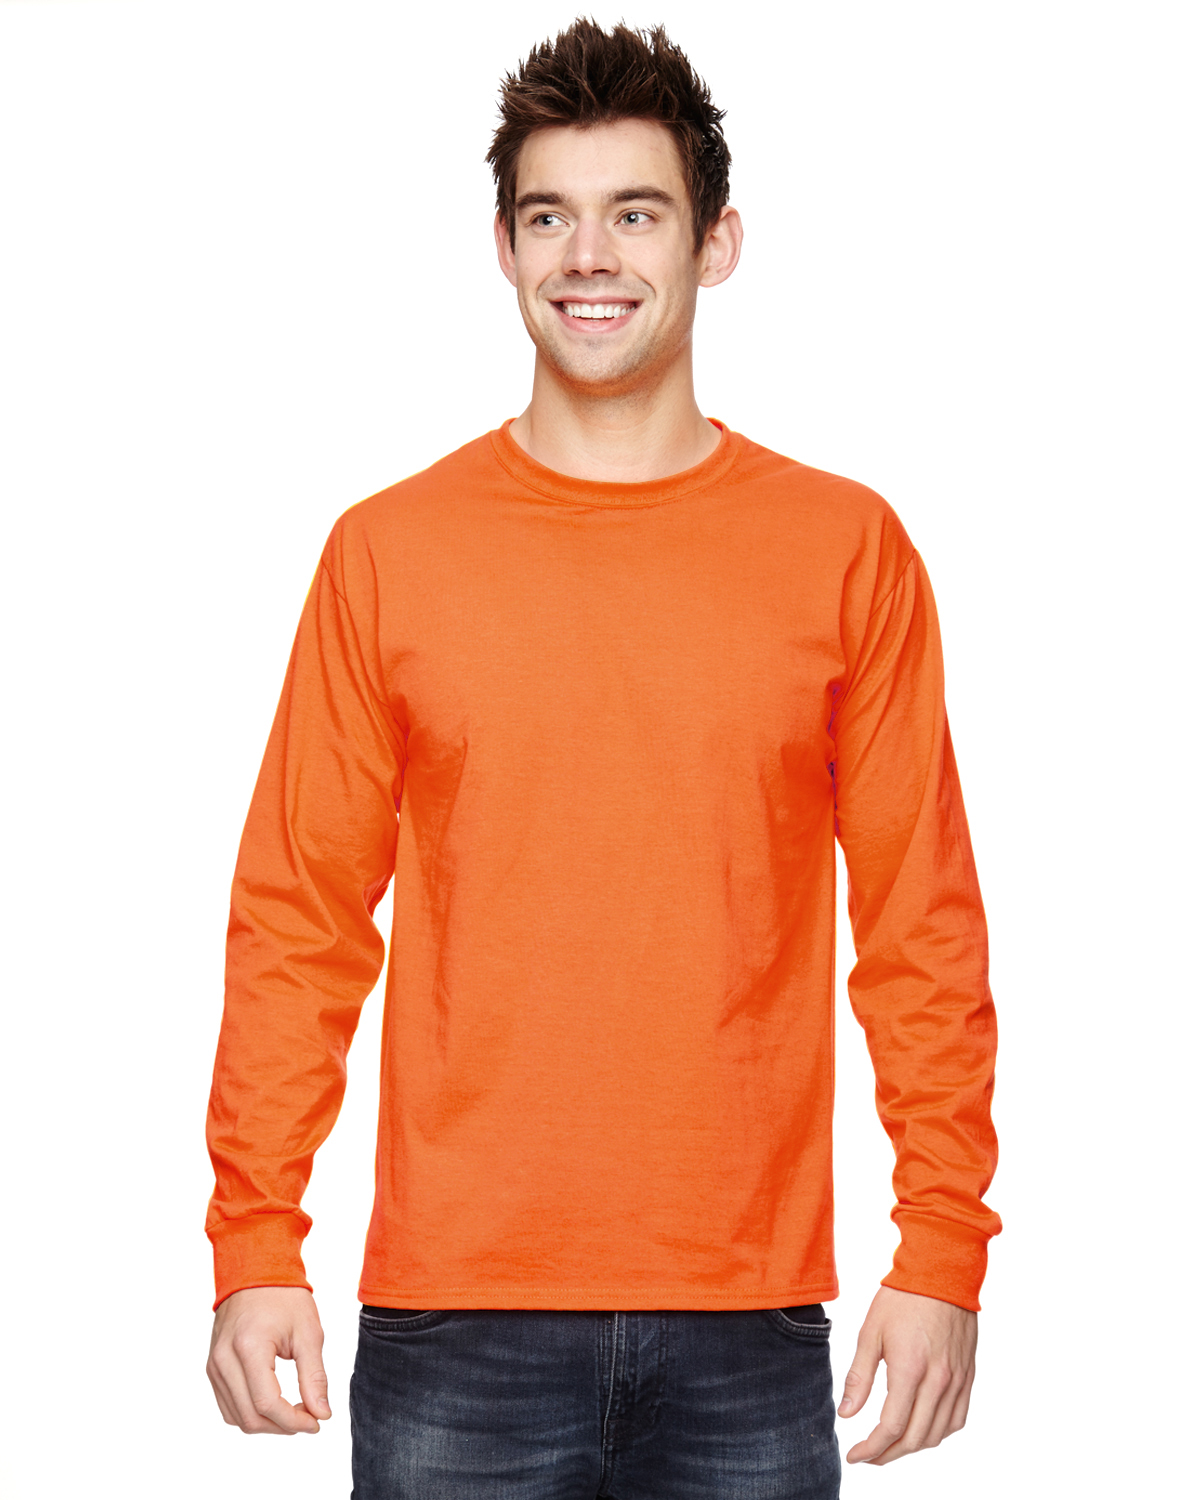 4930 Fruit of the Loom Adult 5 oz. HD Cotton™ Long-Sleeve T-Shirt